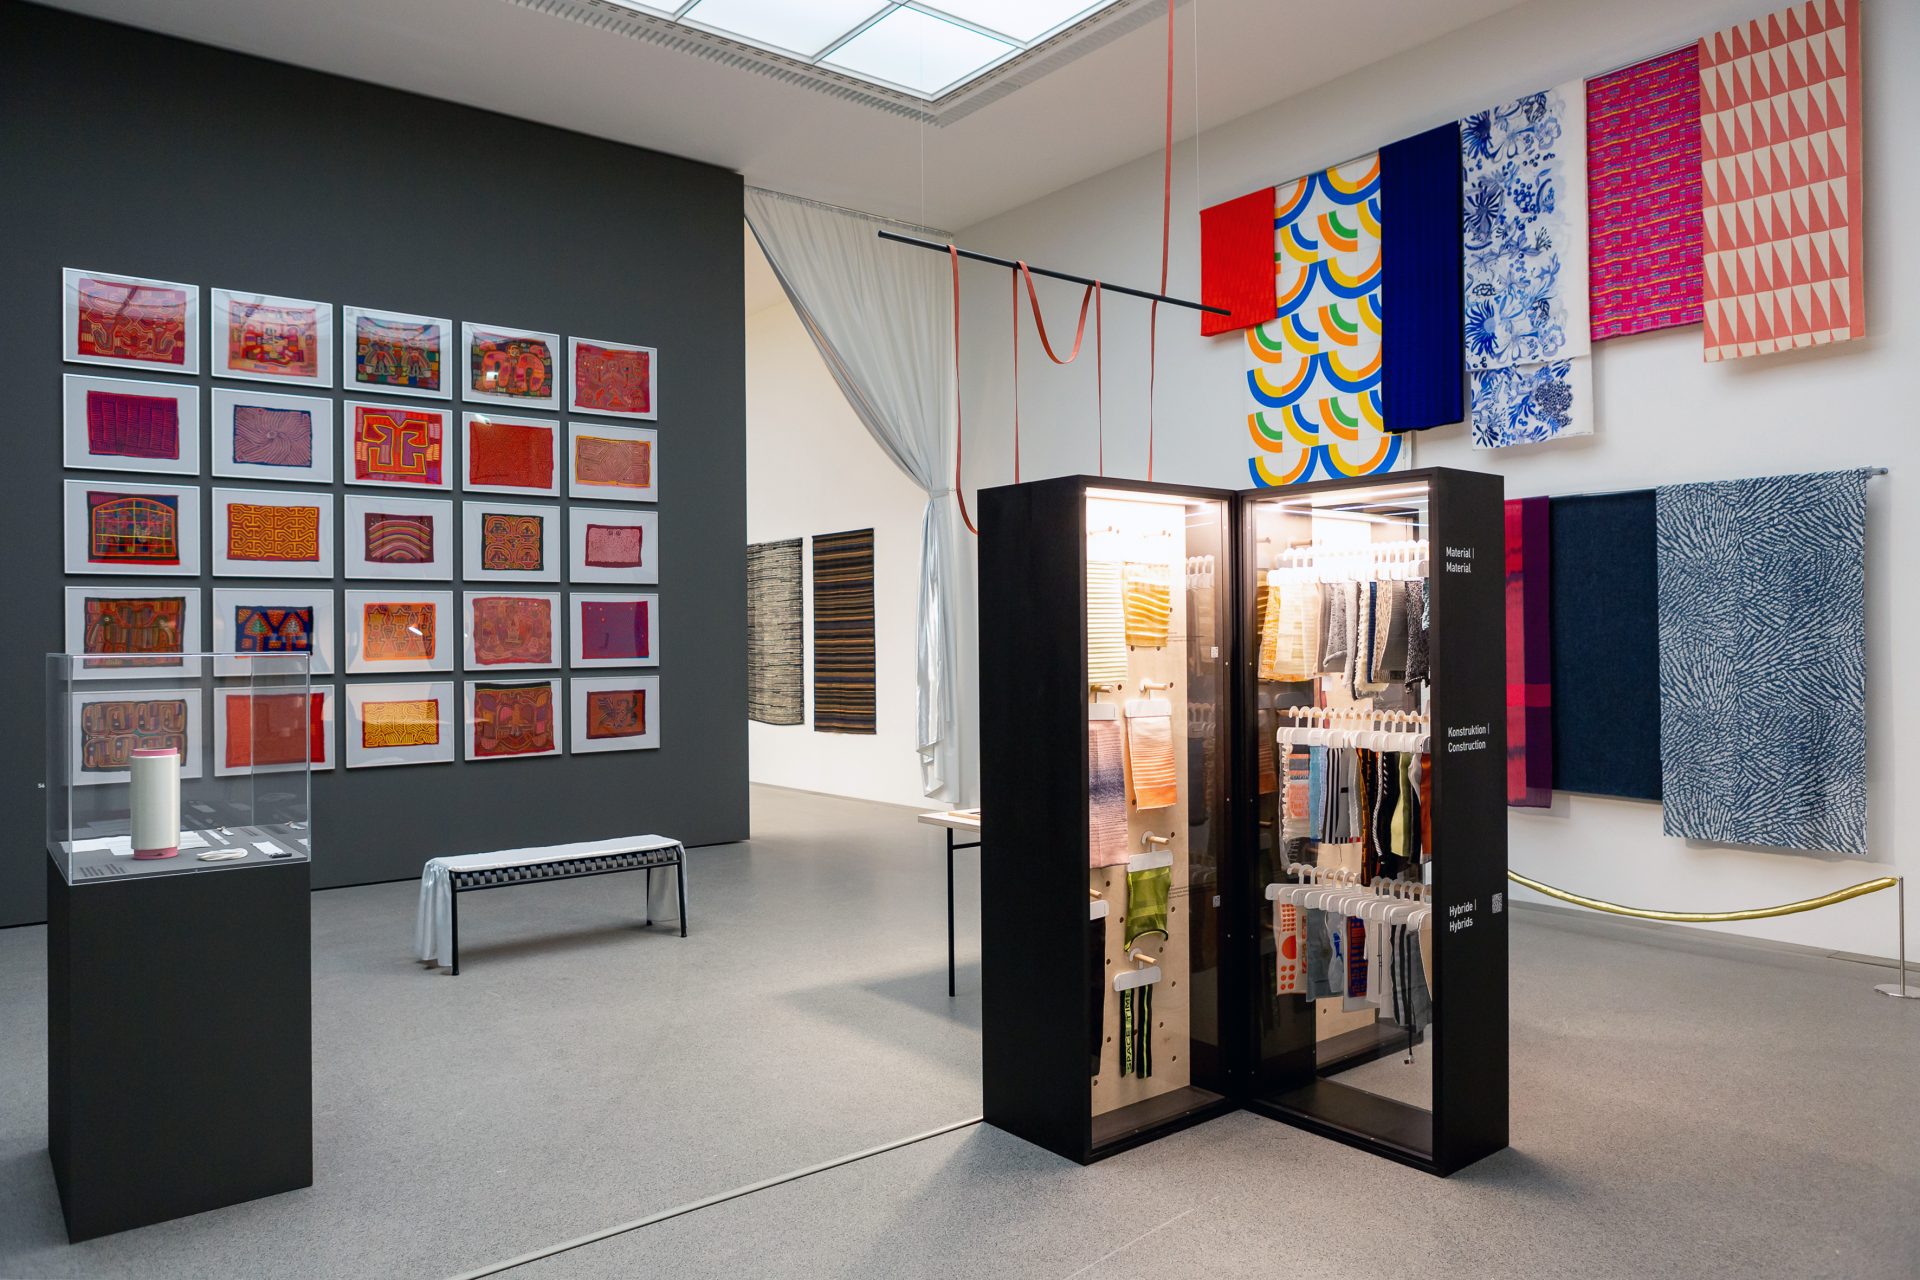 Wall with textiles in frames and hanging textiles, architecure with textile samples